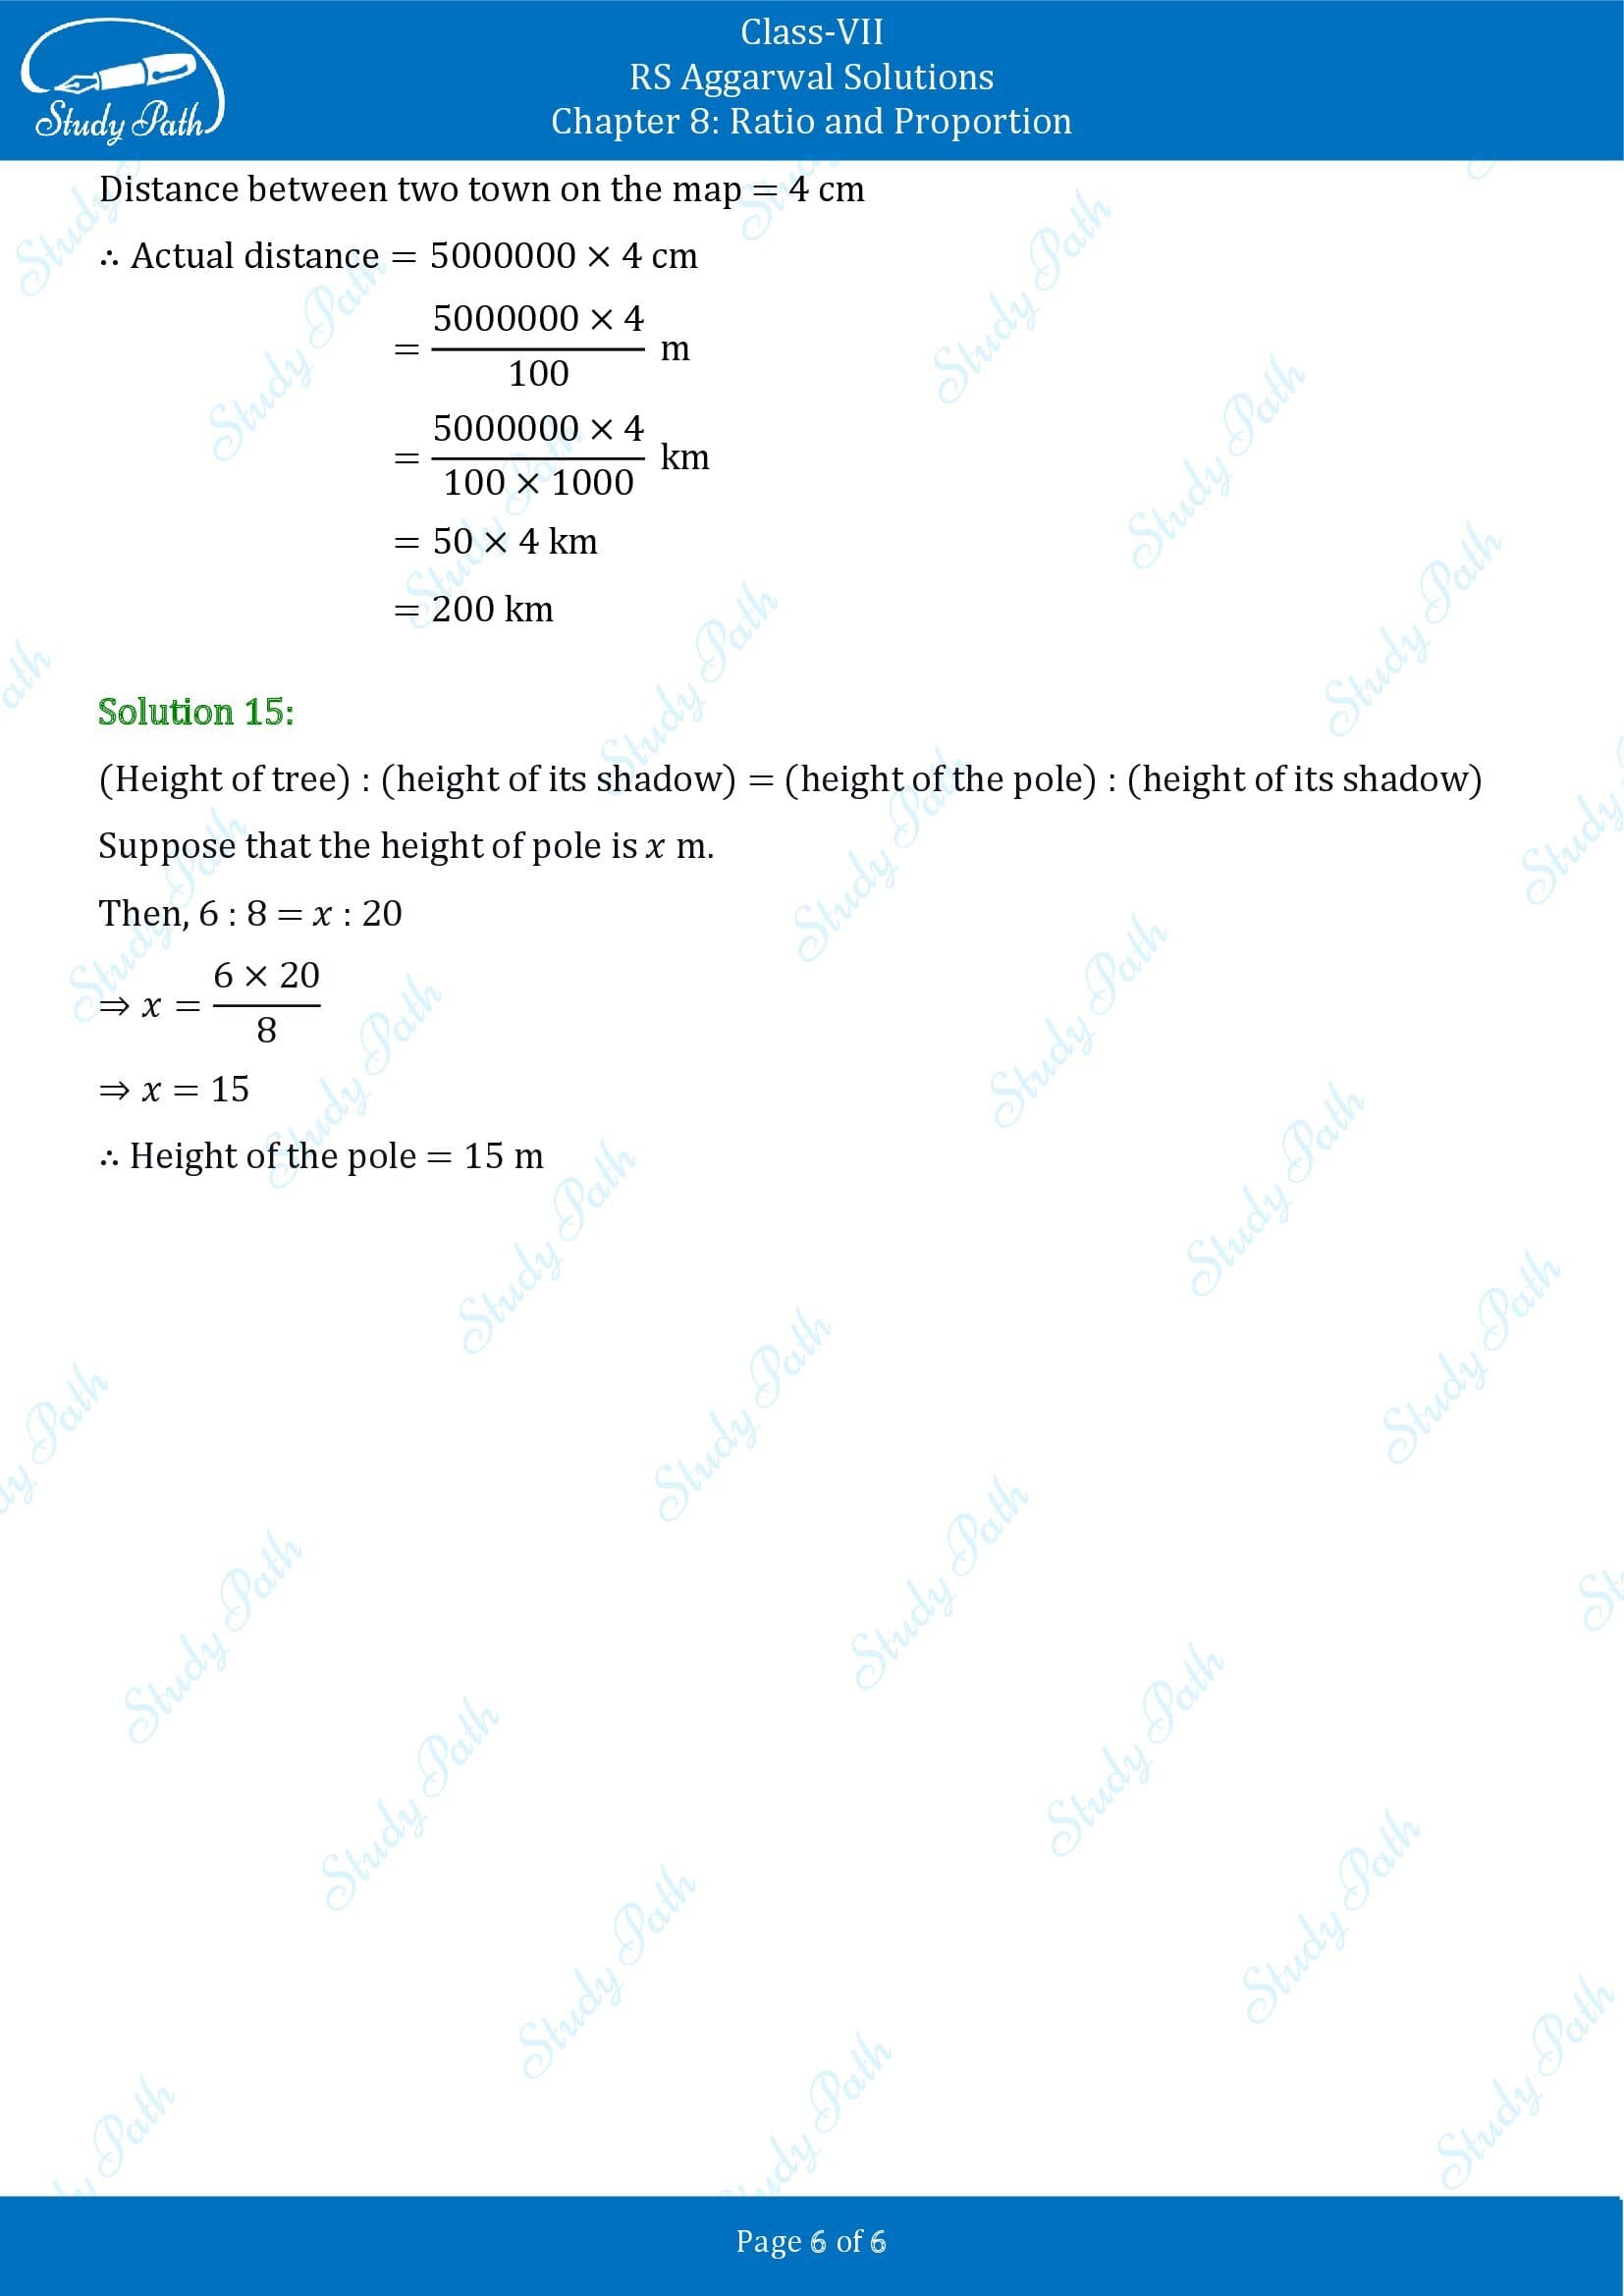 RS Aggarwal Solutions Class 7 Chapter 8 Ratio and Proportion Exercise 8B 00006